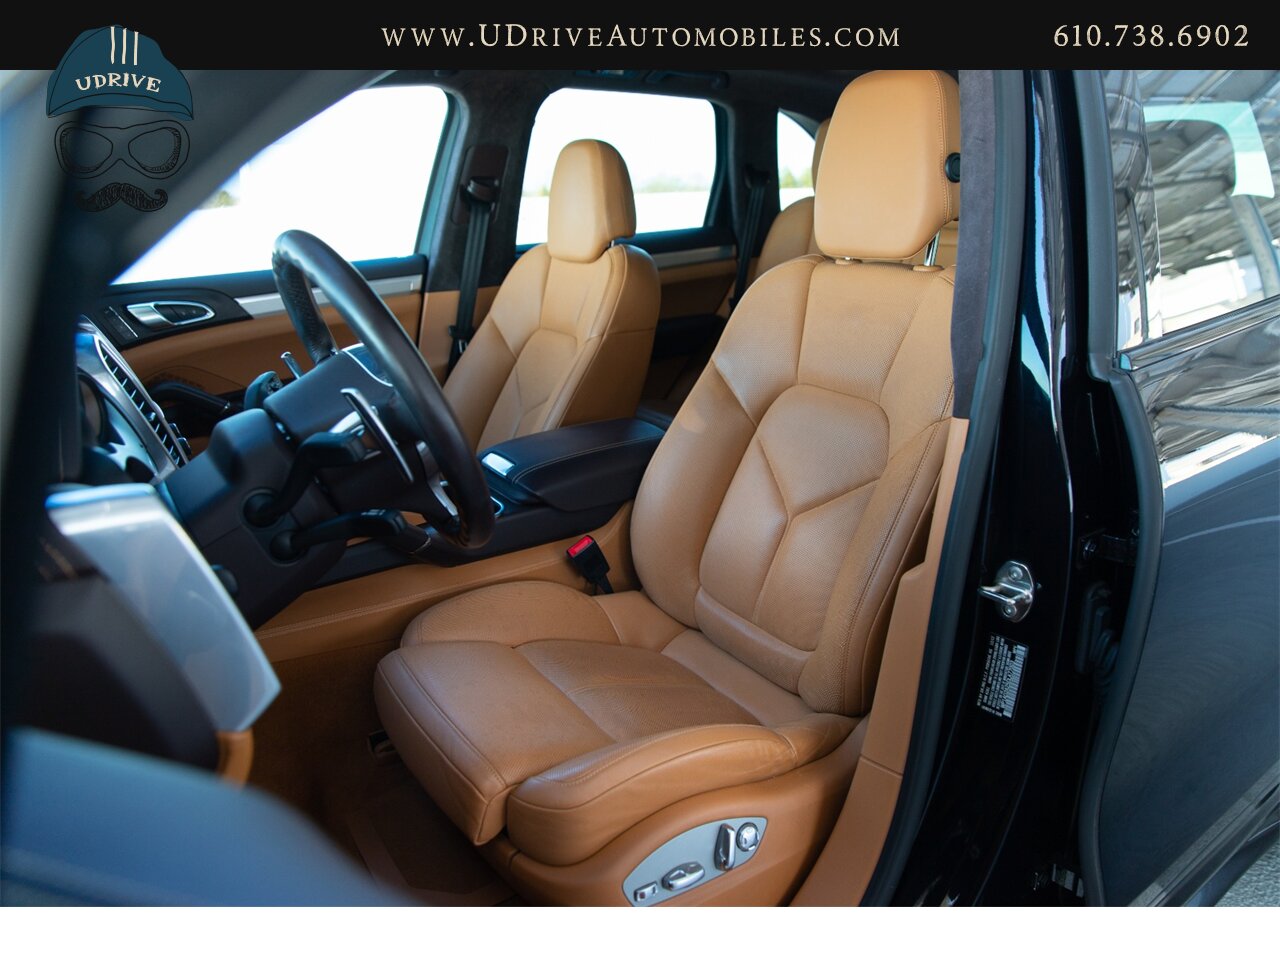 2013 Porsche Cayenne GTS Service History 1 Owner 21in Wheels  Espresso / Cognac Two Tone Leather - Photo 28 - West Chester, PA 19382